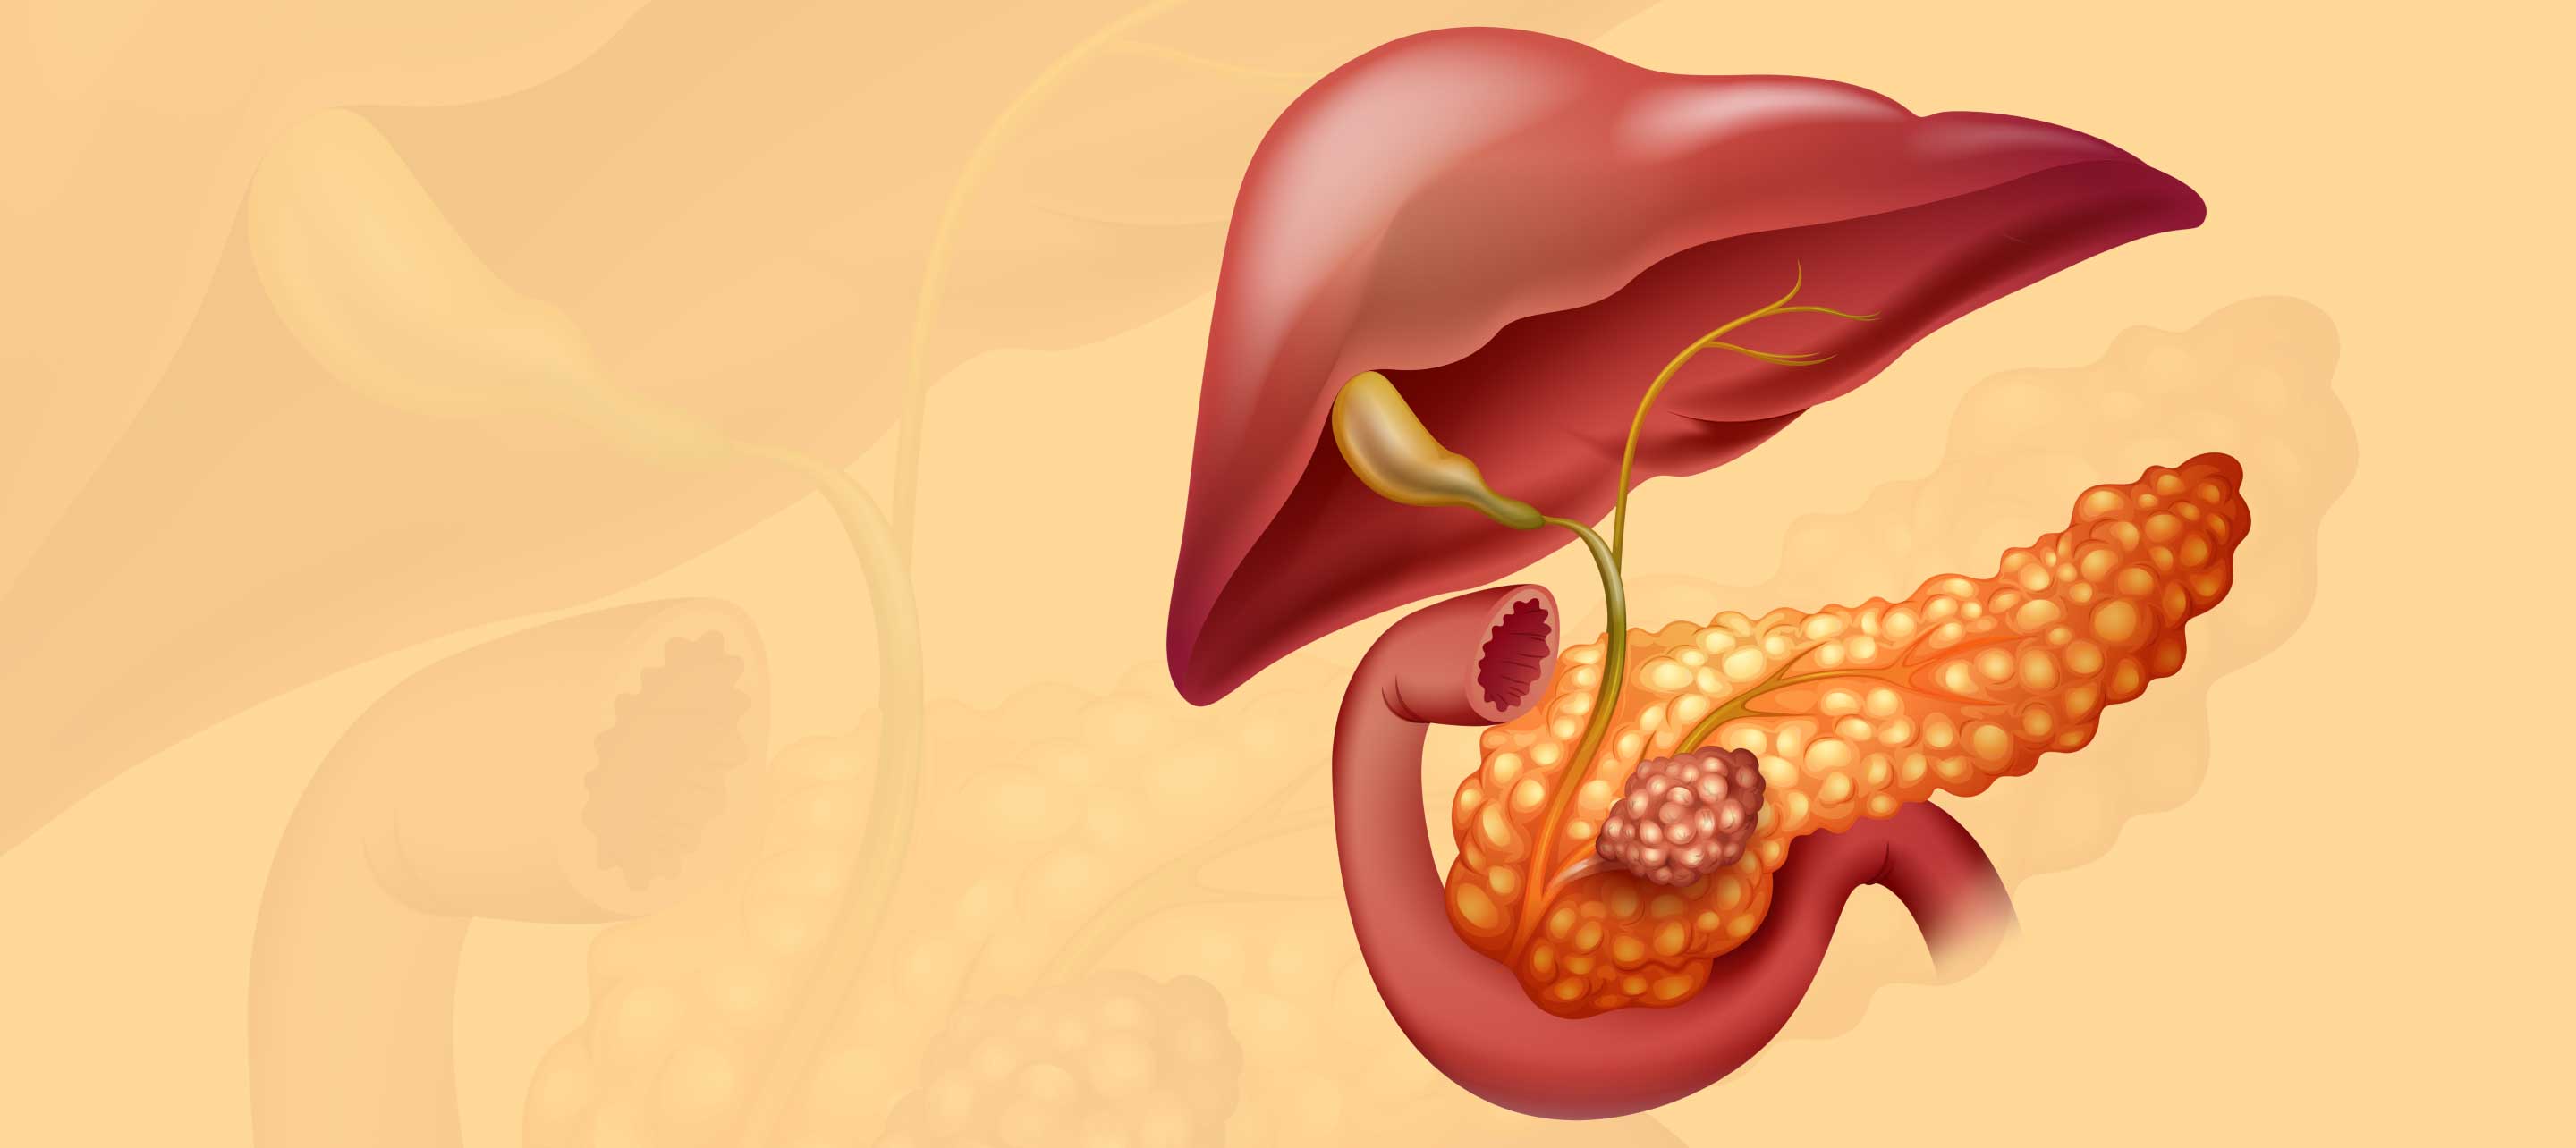 Bile Duct Cancer Surgery Cost in Pune, India